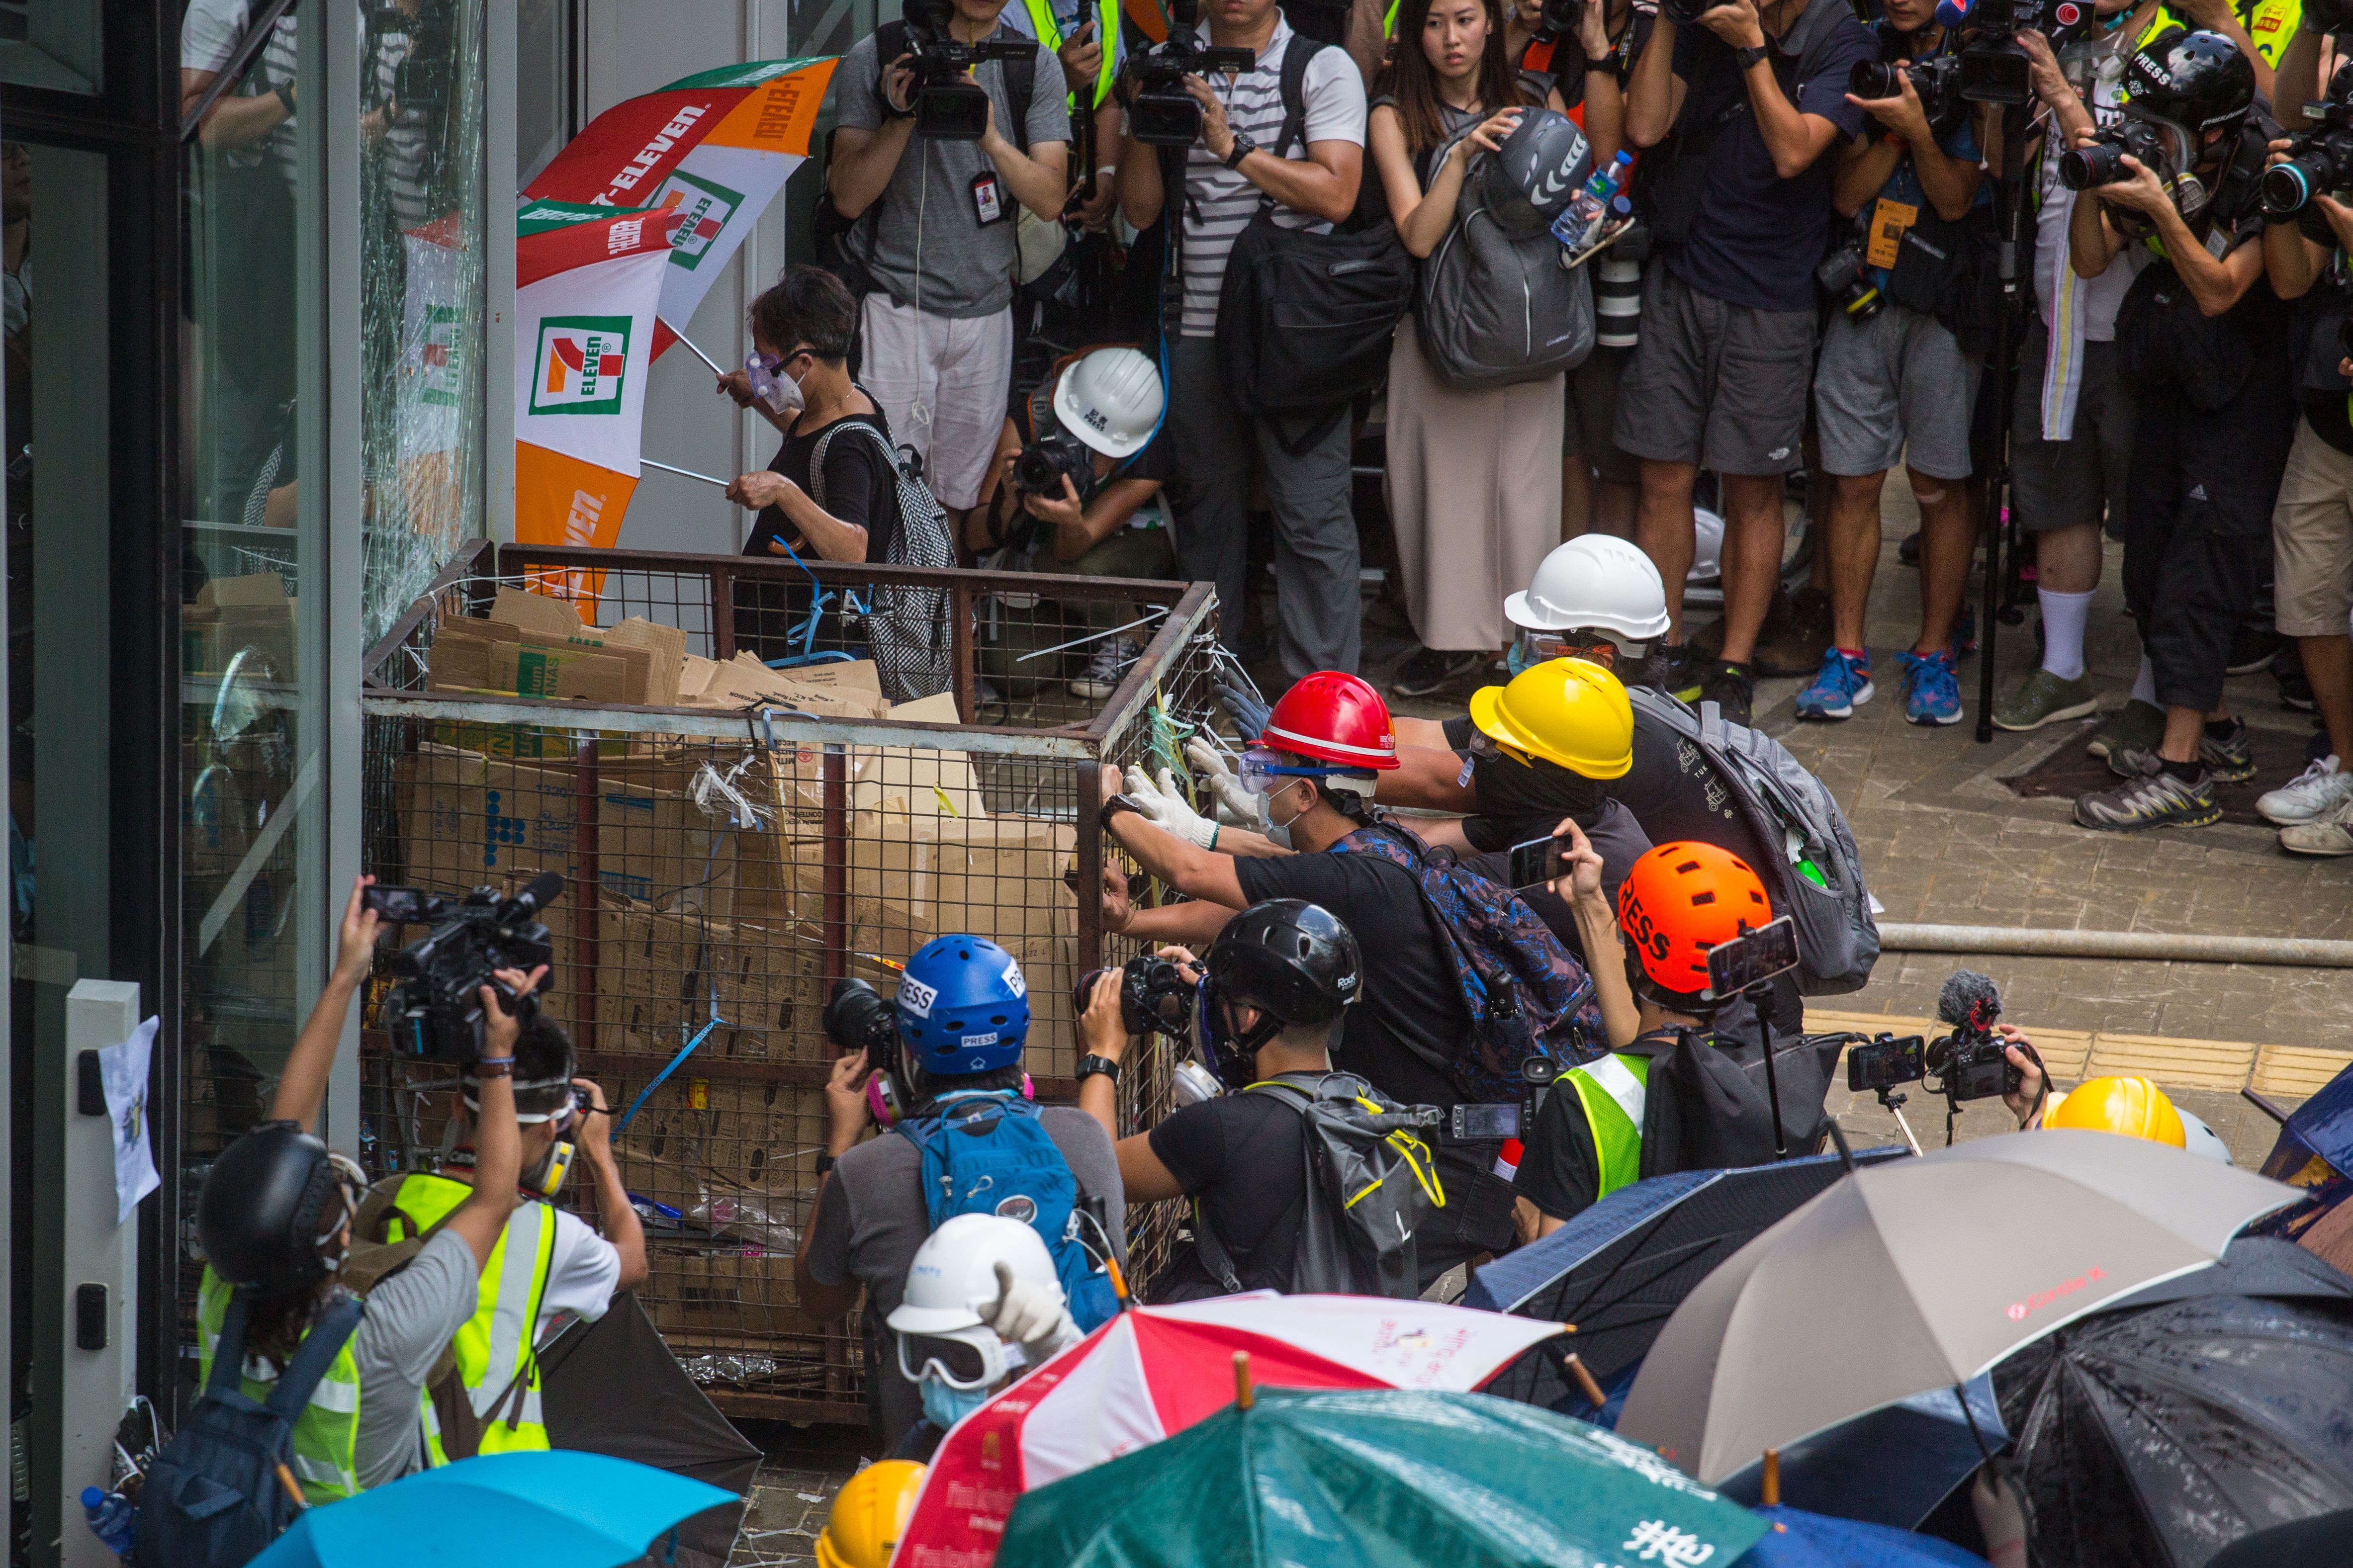  Protesters try to push a metal cart through a closed entrance at the government headquarters in Hong Kong.